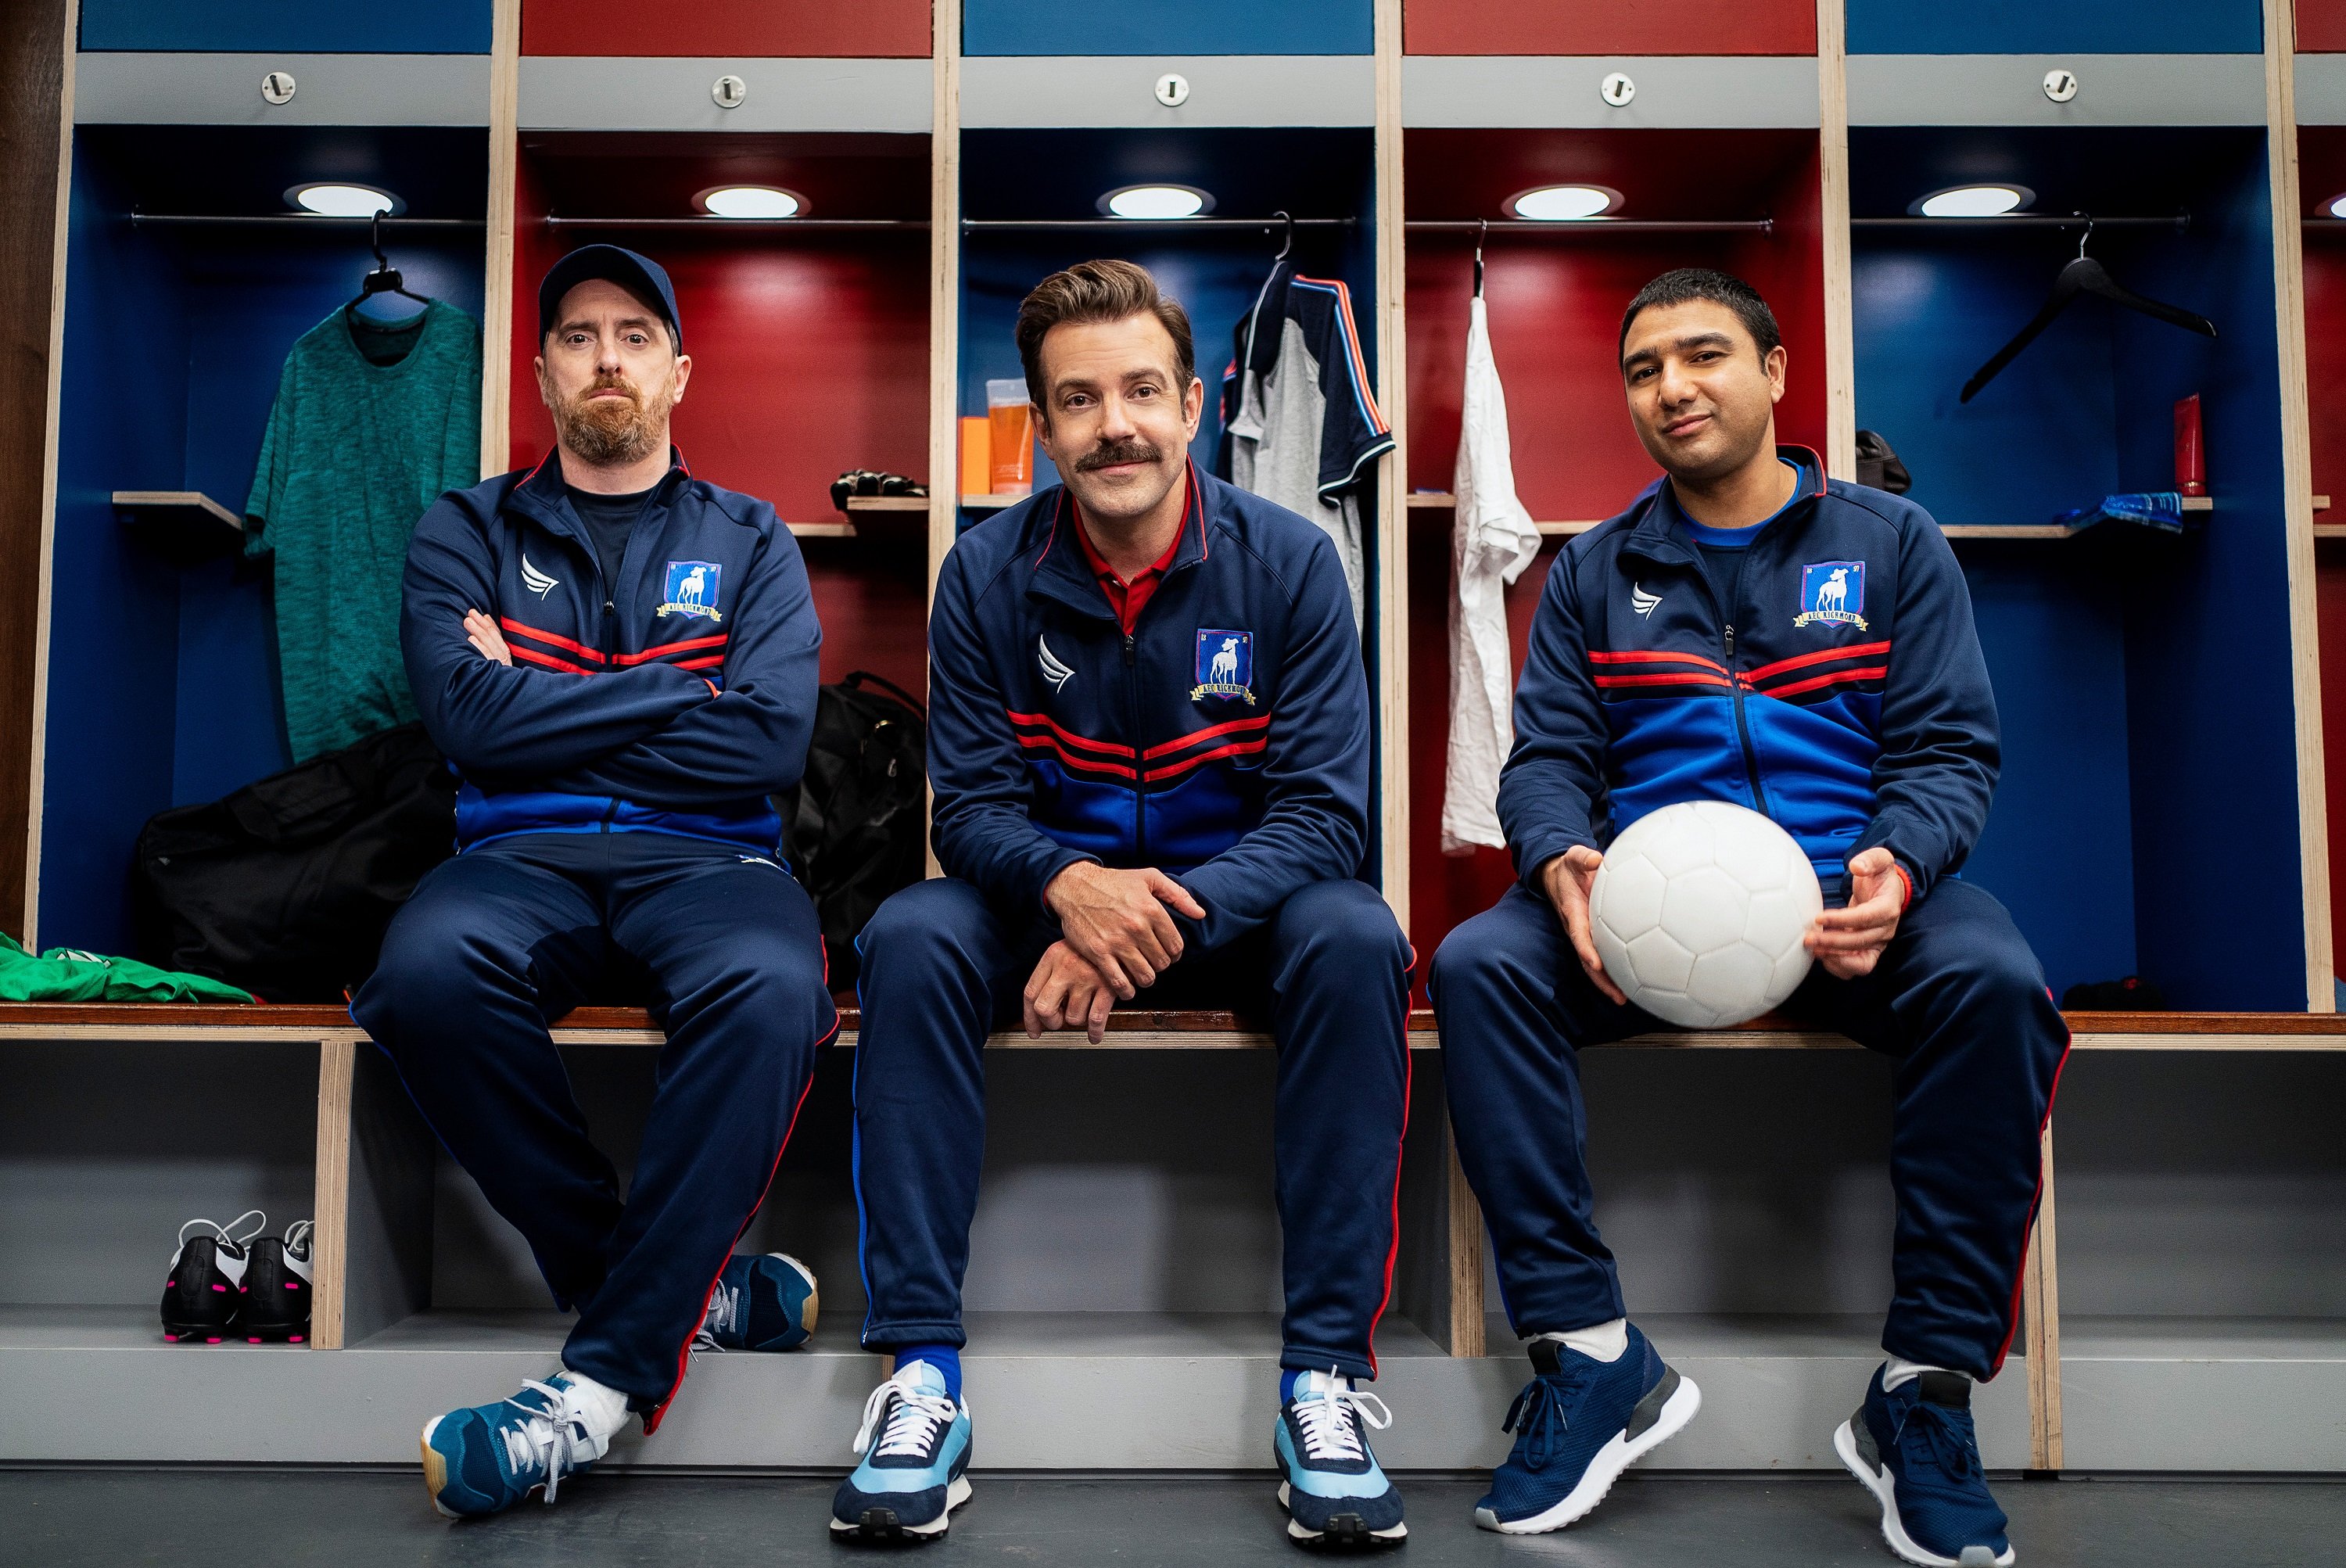 Ted Lasso Season 2 Episode 2 Brendan Hunt as Coach Beard, Jason Sudeikis as Ted Lasso and Nick Mohammed as Nate the Great sitting in the locker room